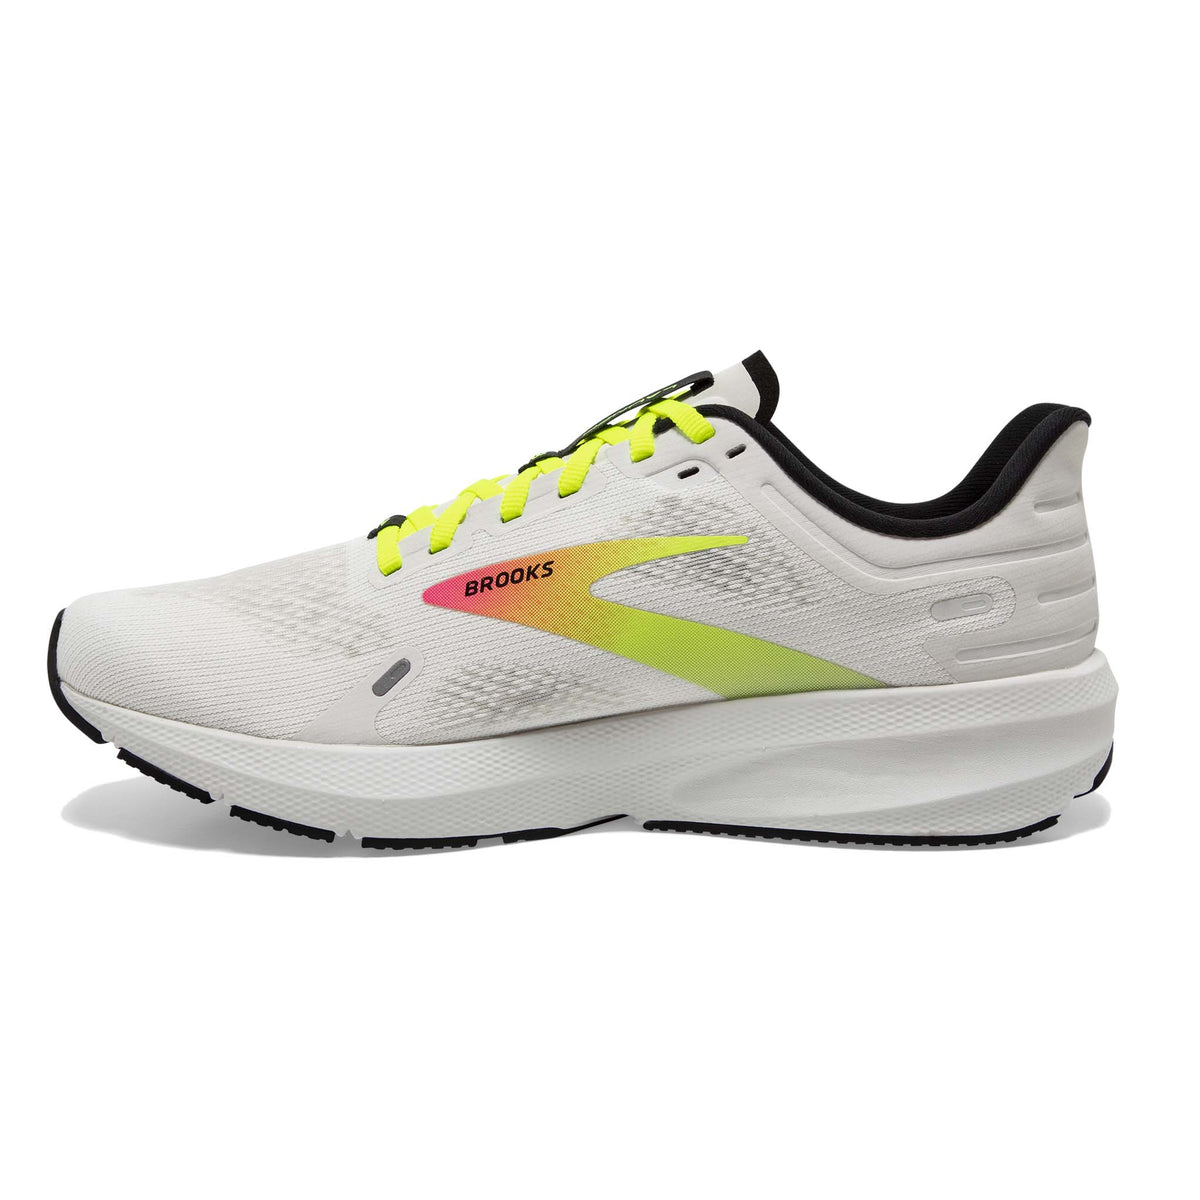 Brooks Launch 9 running femme - white pink nightlife lateral